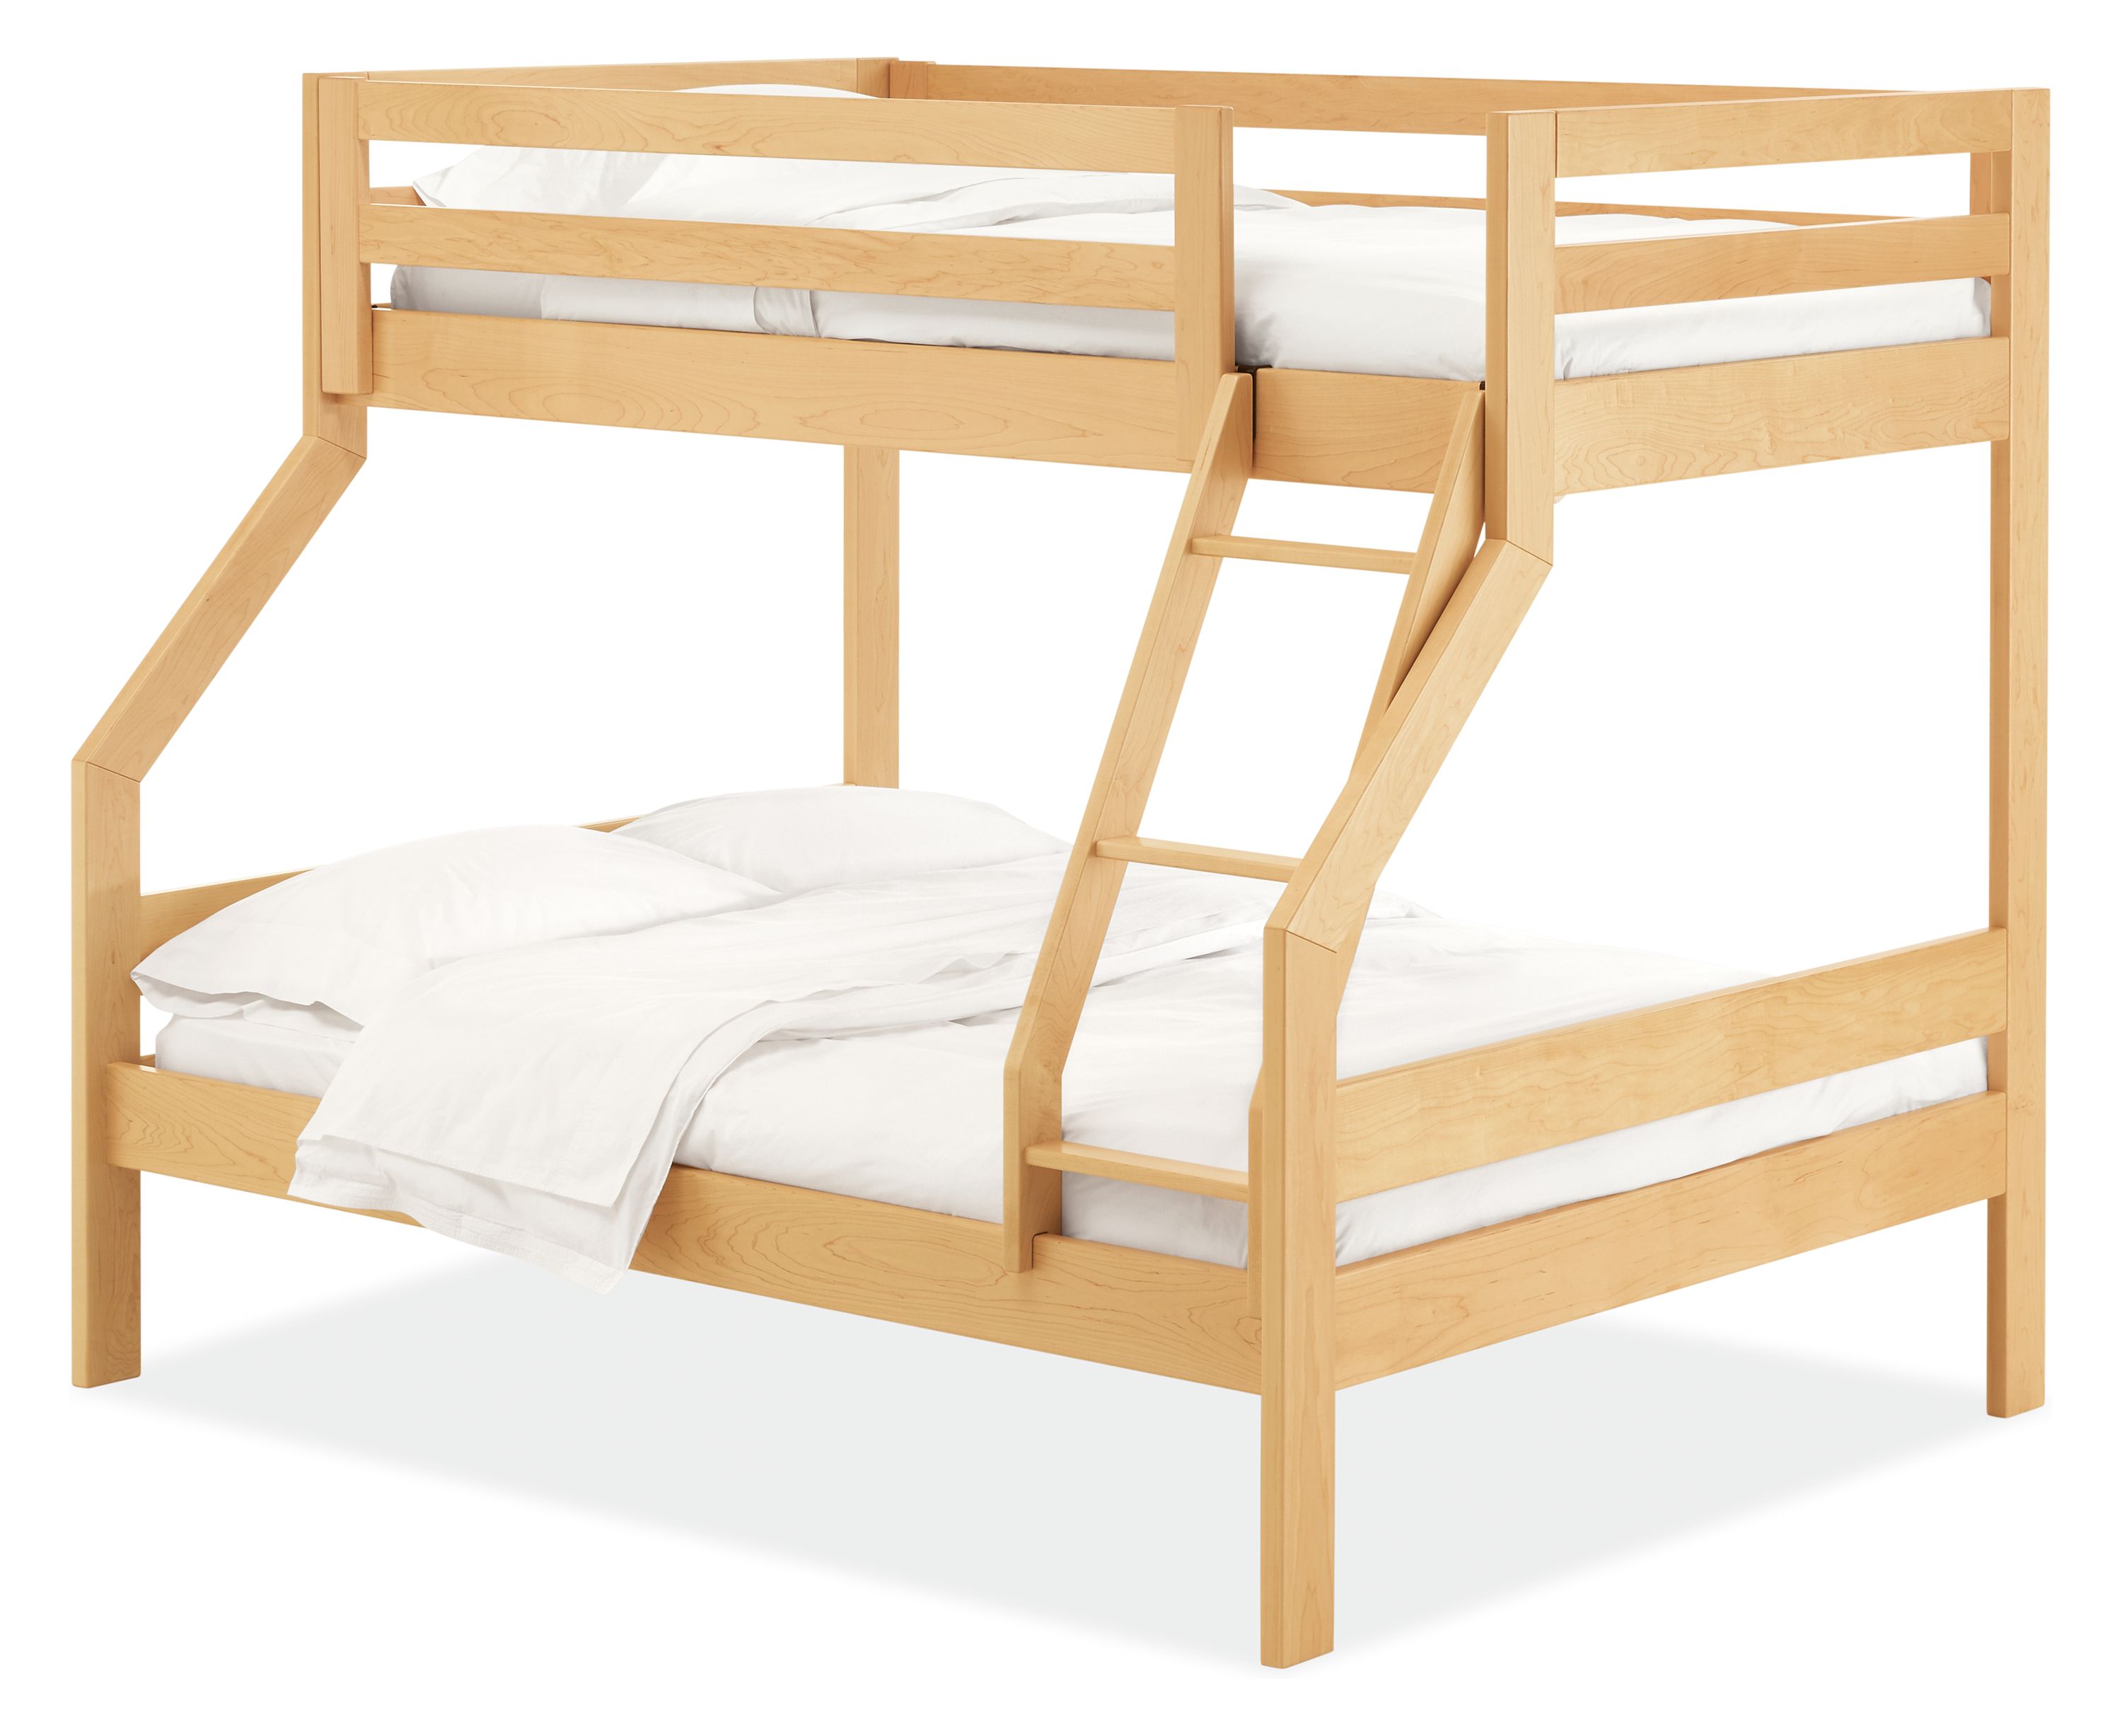 Waverly Bunk Bed Twin Over Full, Bunk Beds For Kids Full Over Full